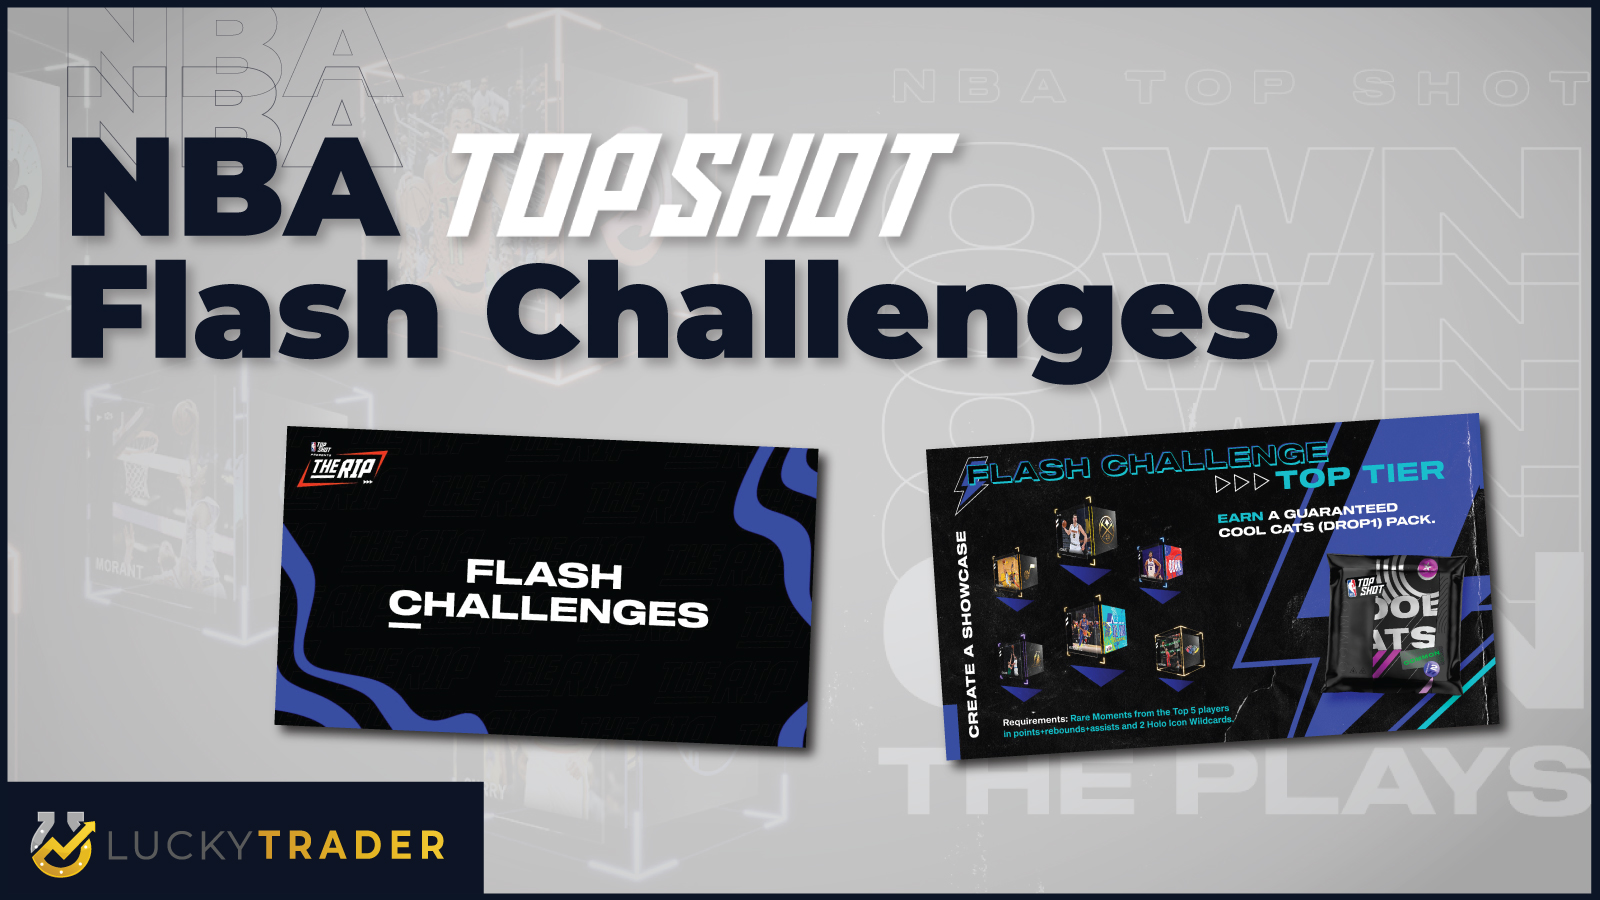 What Are NBA Top Shot Flash Challenges?